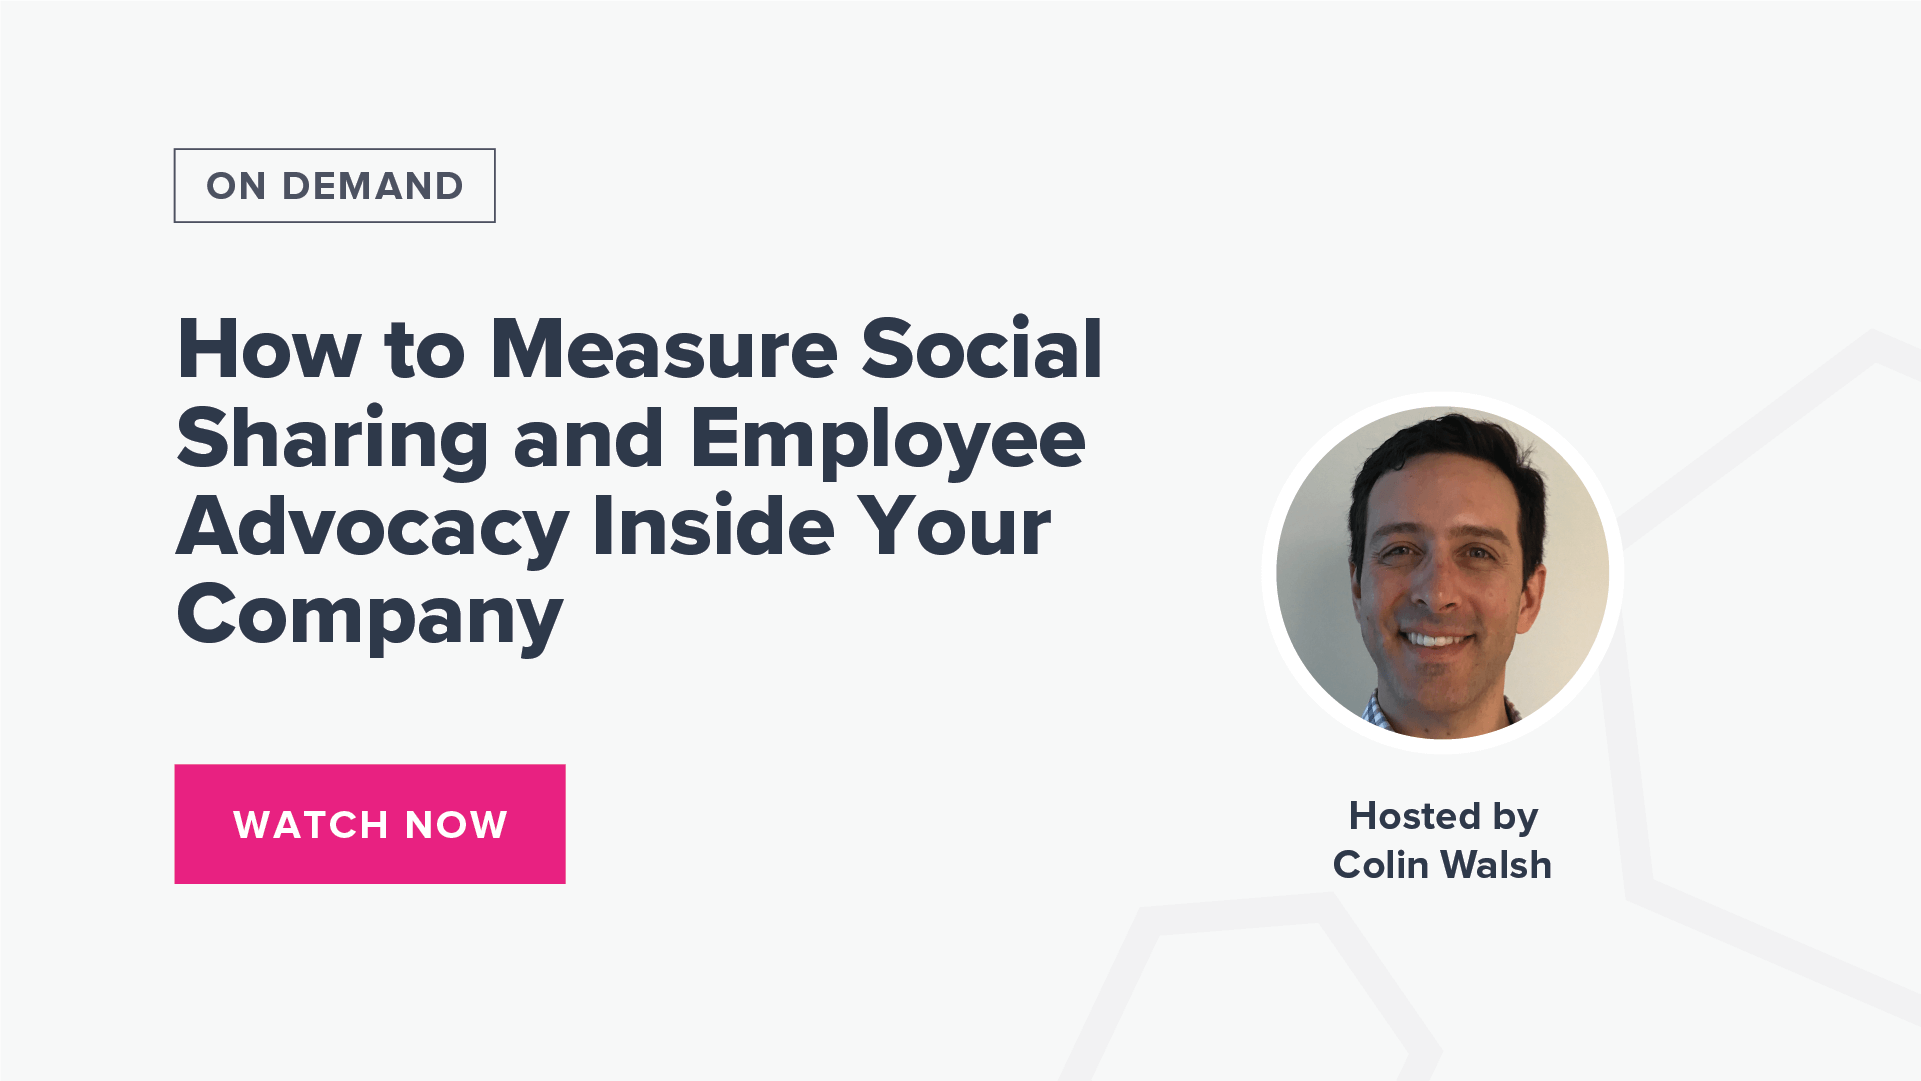 How to Measure Social Sharing and Employee Advocacy Inside Your Company